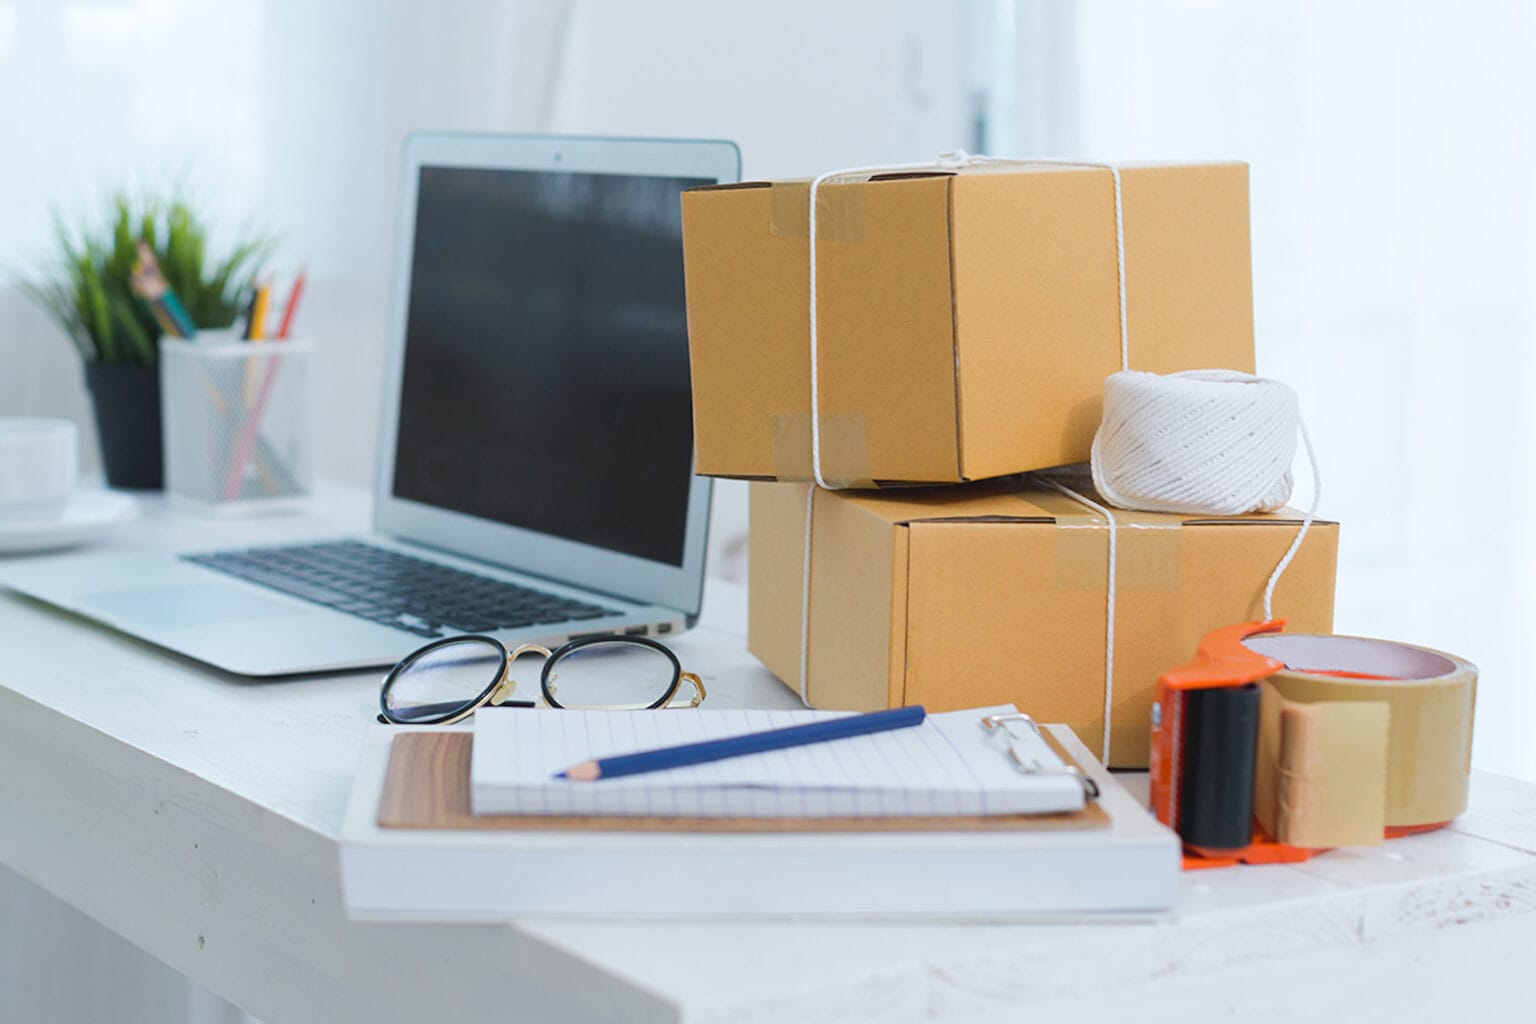 Launch your own Amazon business with this dropshipping bundle.